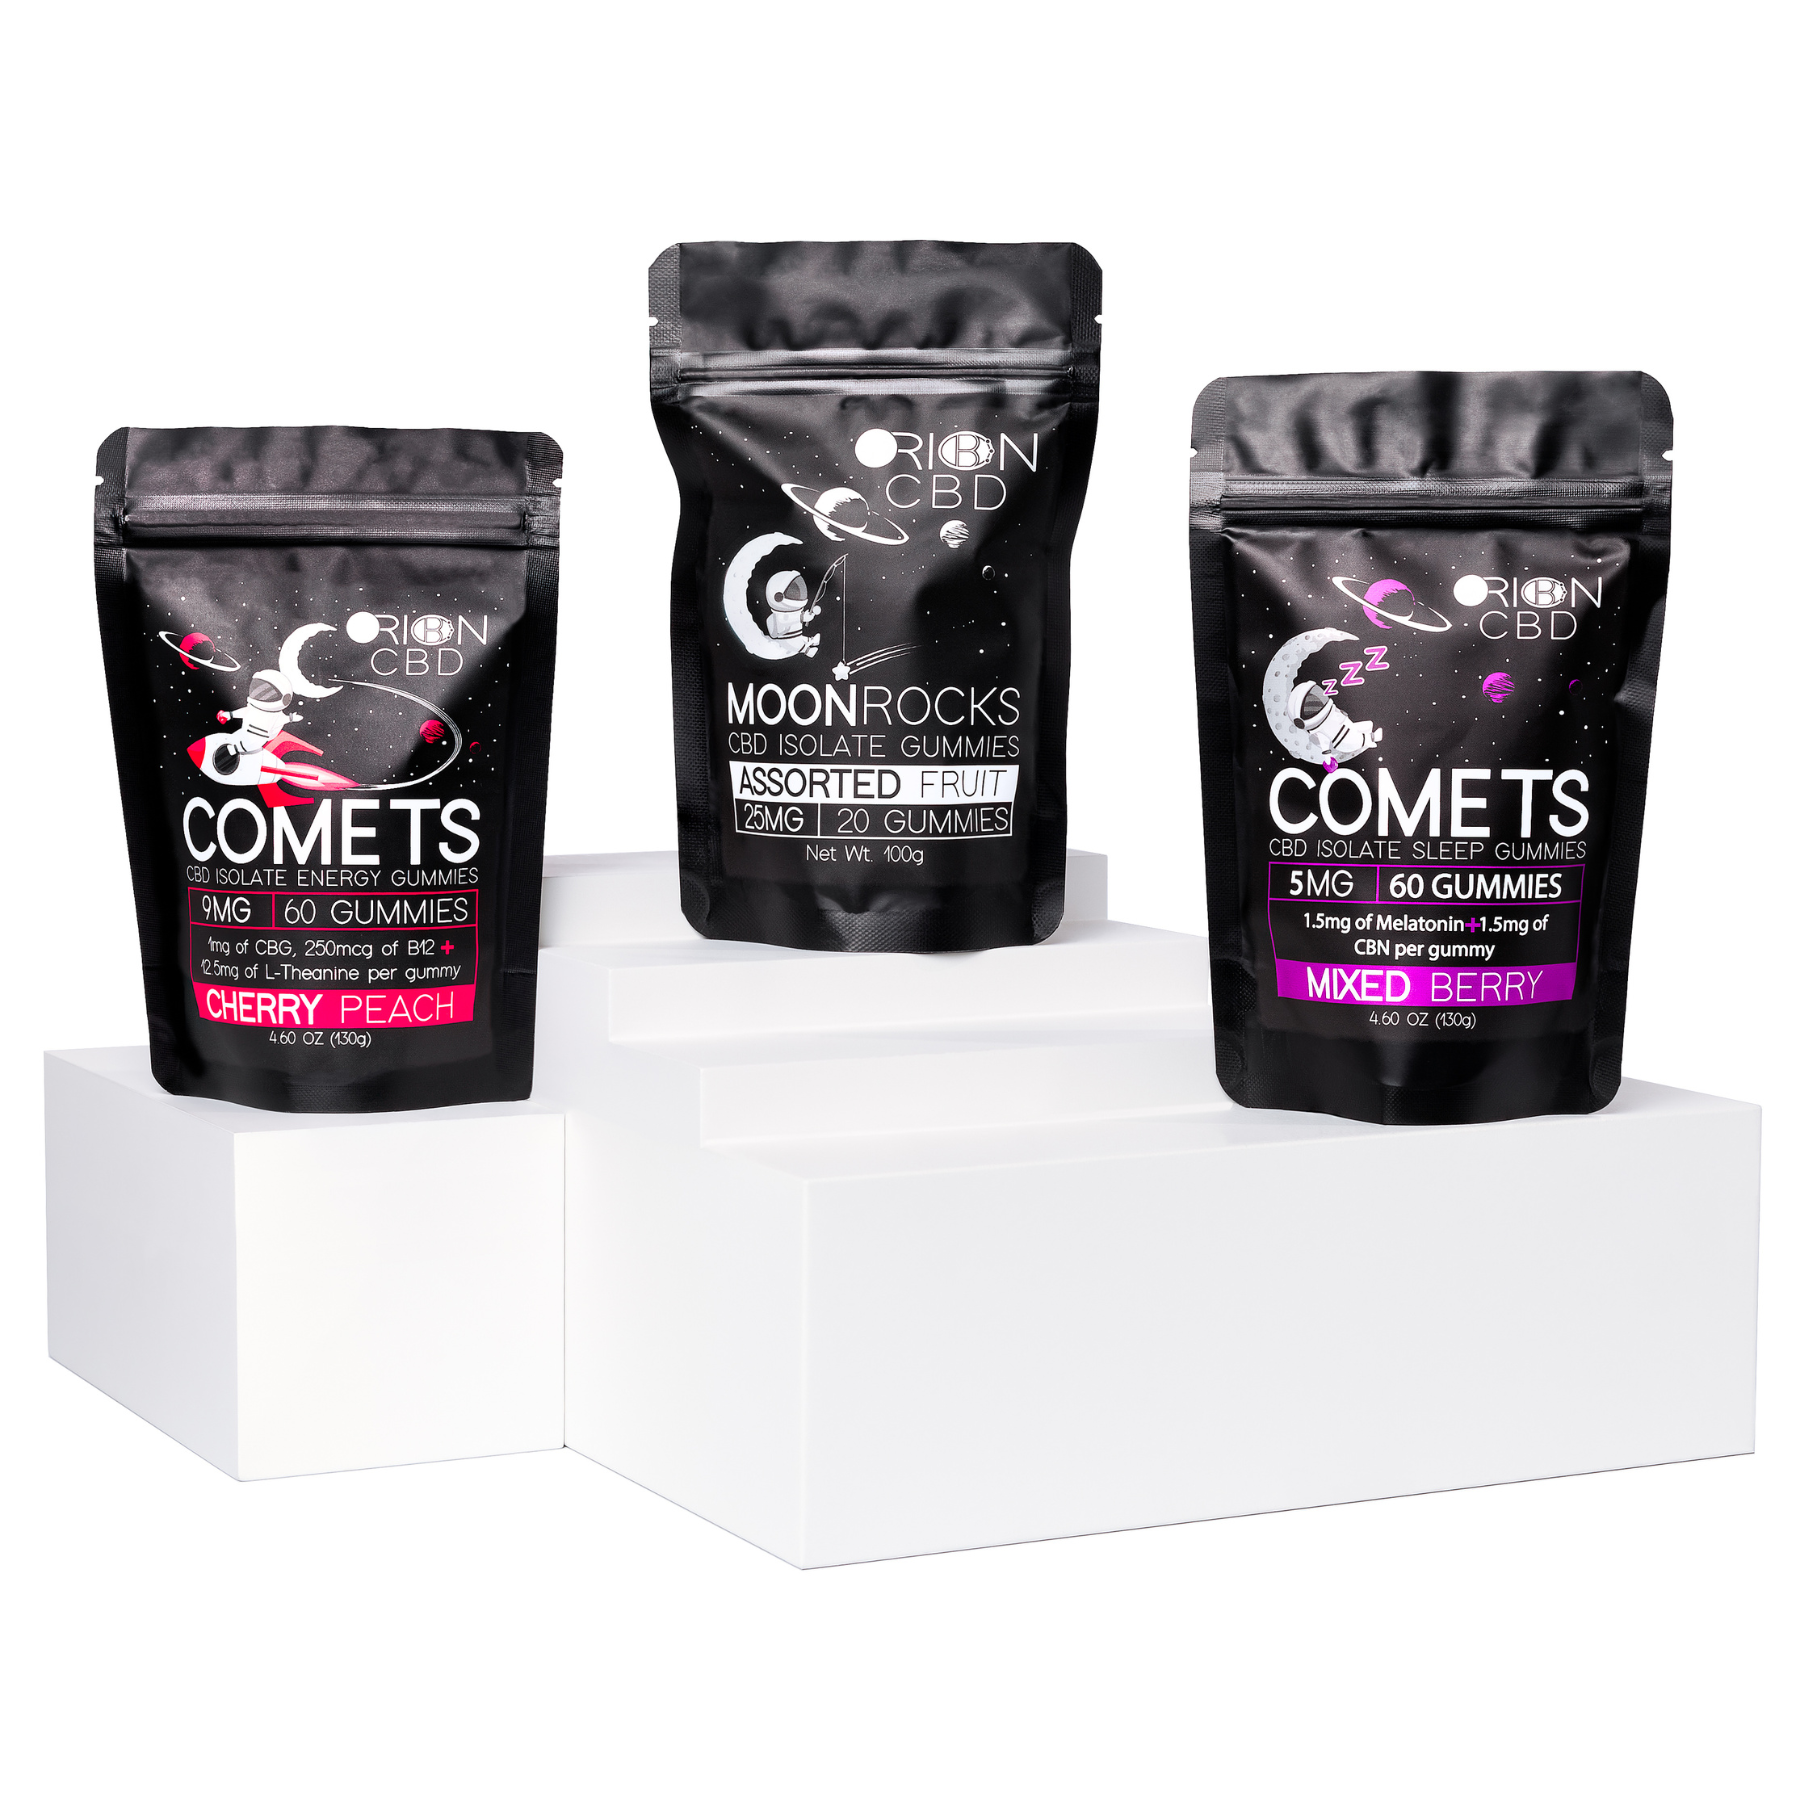 Orion CBD Gummies Bundle featuring Energy Gummies in cherry peach flavor, Sleep Gummies in mixed berry flavor, and Wellness Gummies in assorted fruit flavor, displayed on white blocks against a white background